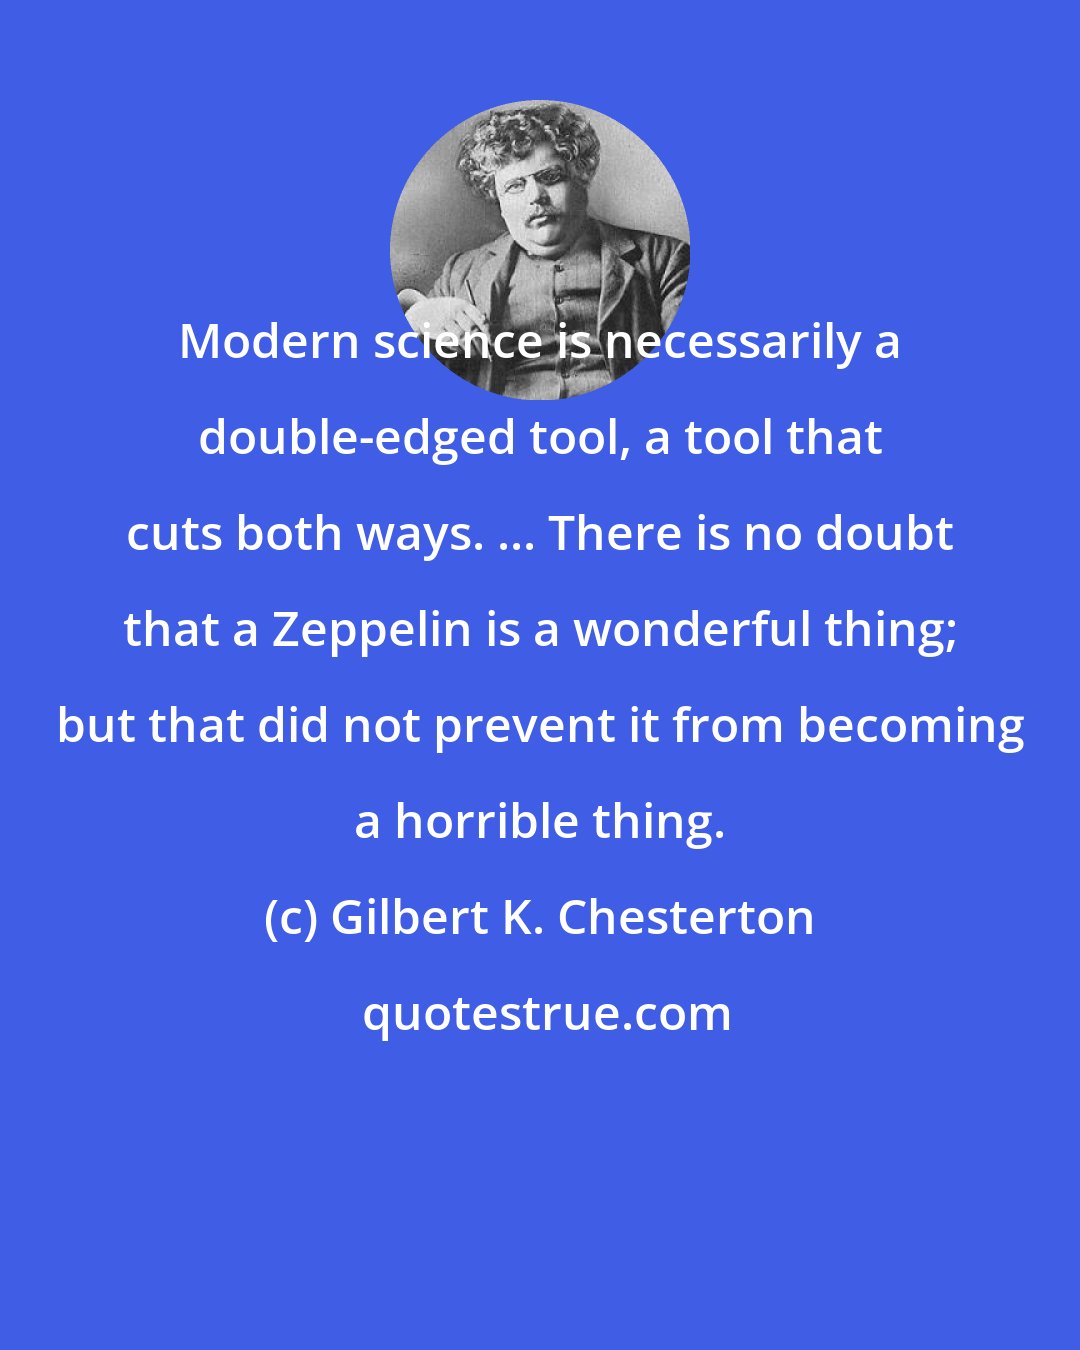 Gilbert K. Chesterton: Modern science is necessarily a double-edged tool, a tool that cuts both ways. ... There is no doubt that a Zeppelin is a wonderful thing; but that did not prevent it from becoming a horrible thing.